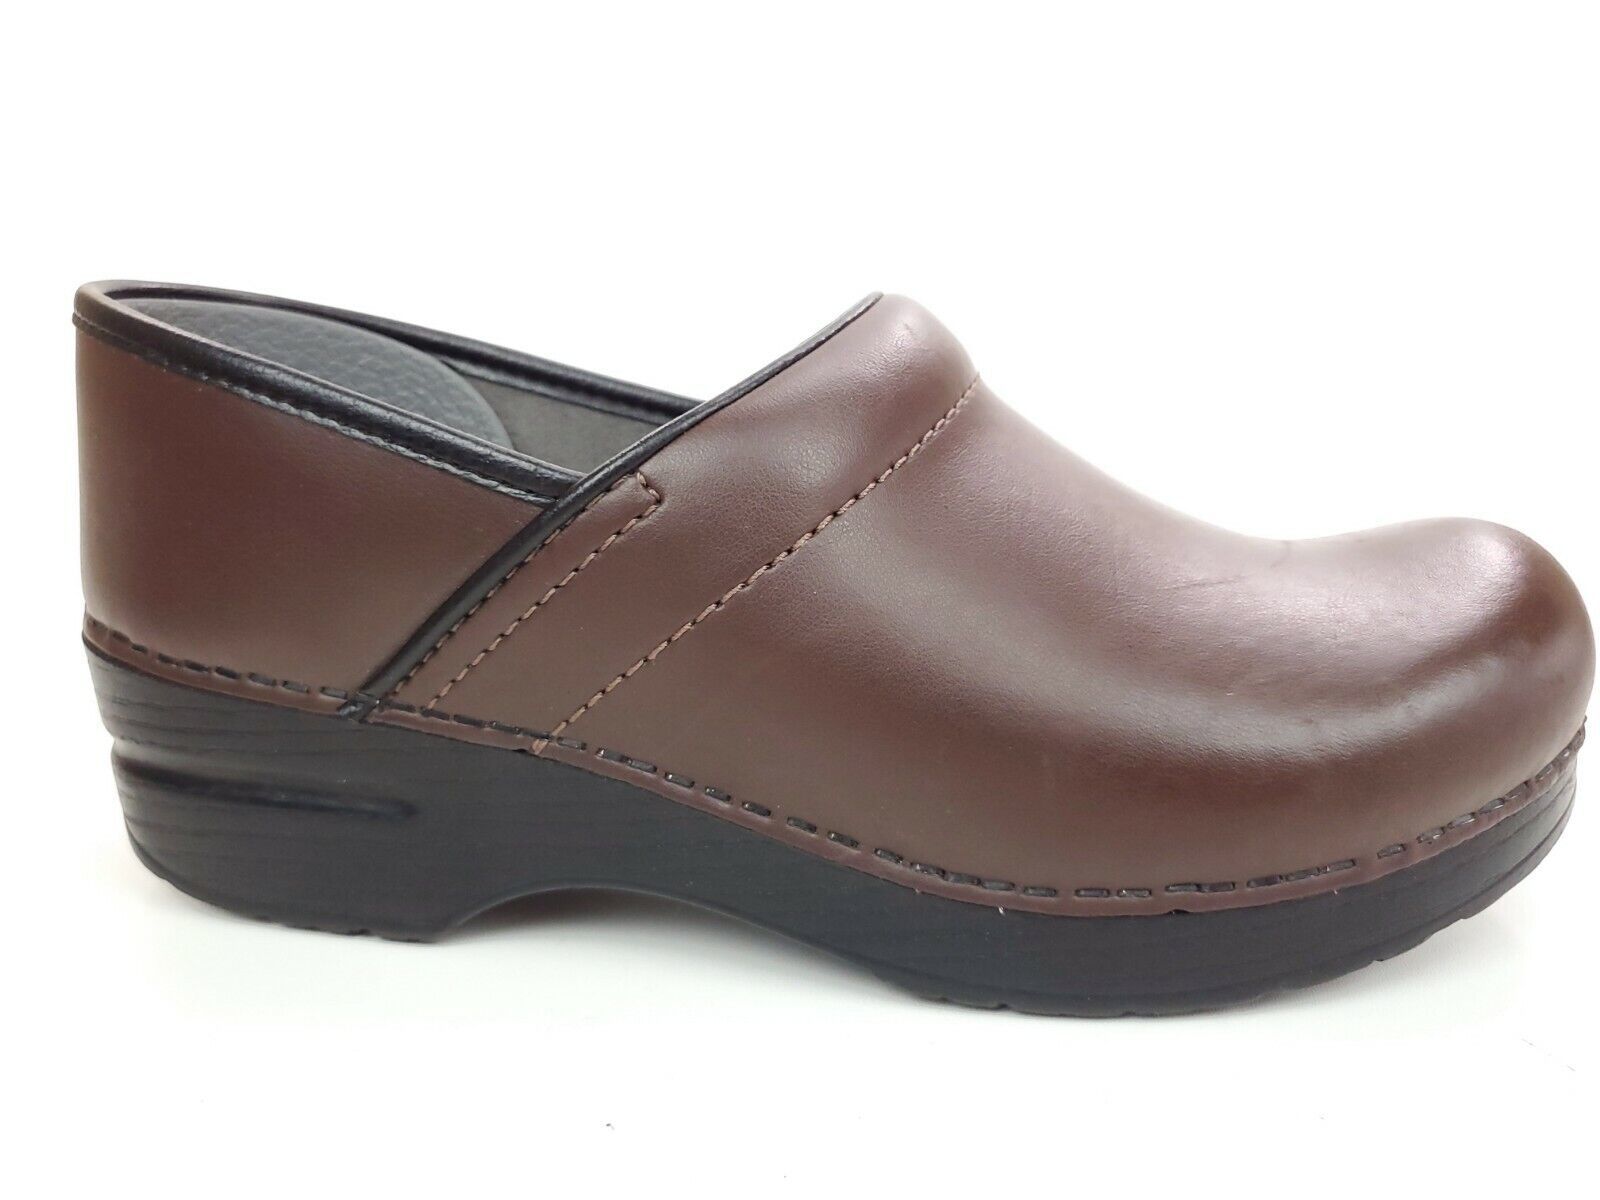 Primary image for Dansko Professional Stapled Clog Brown Leather Size 38 US 7.5-8